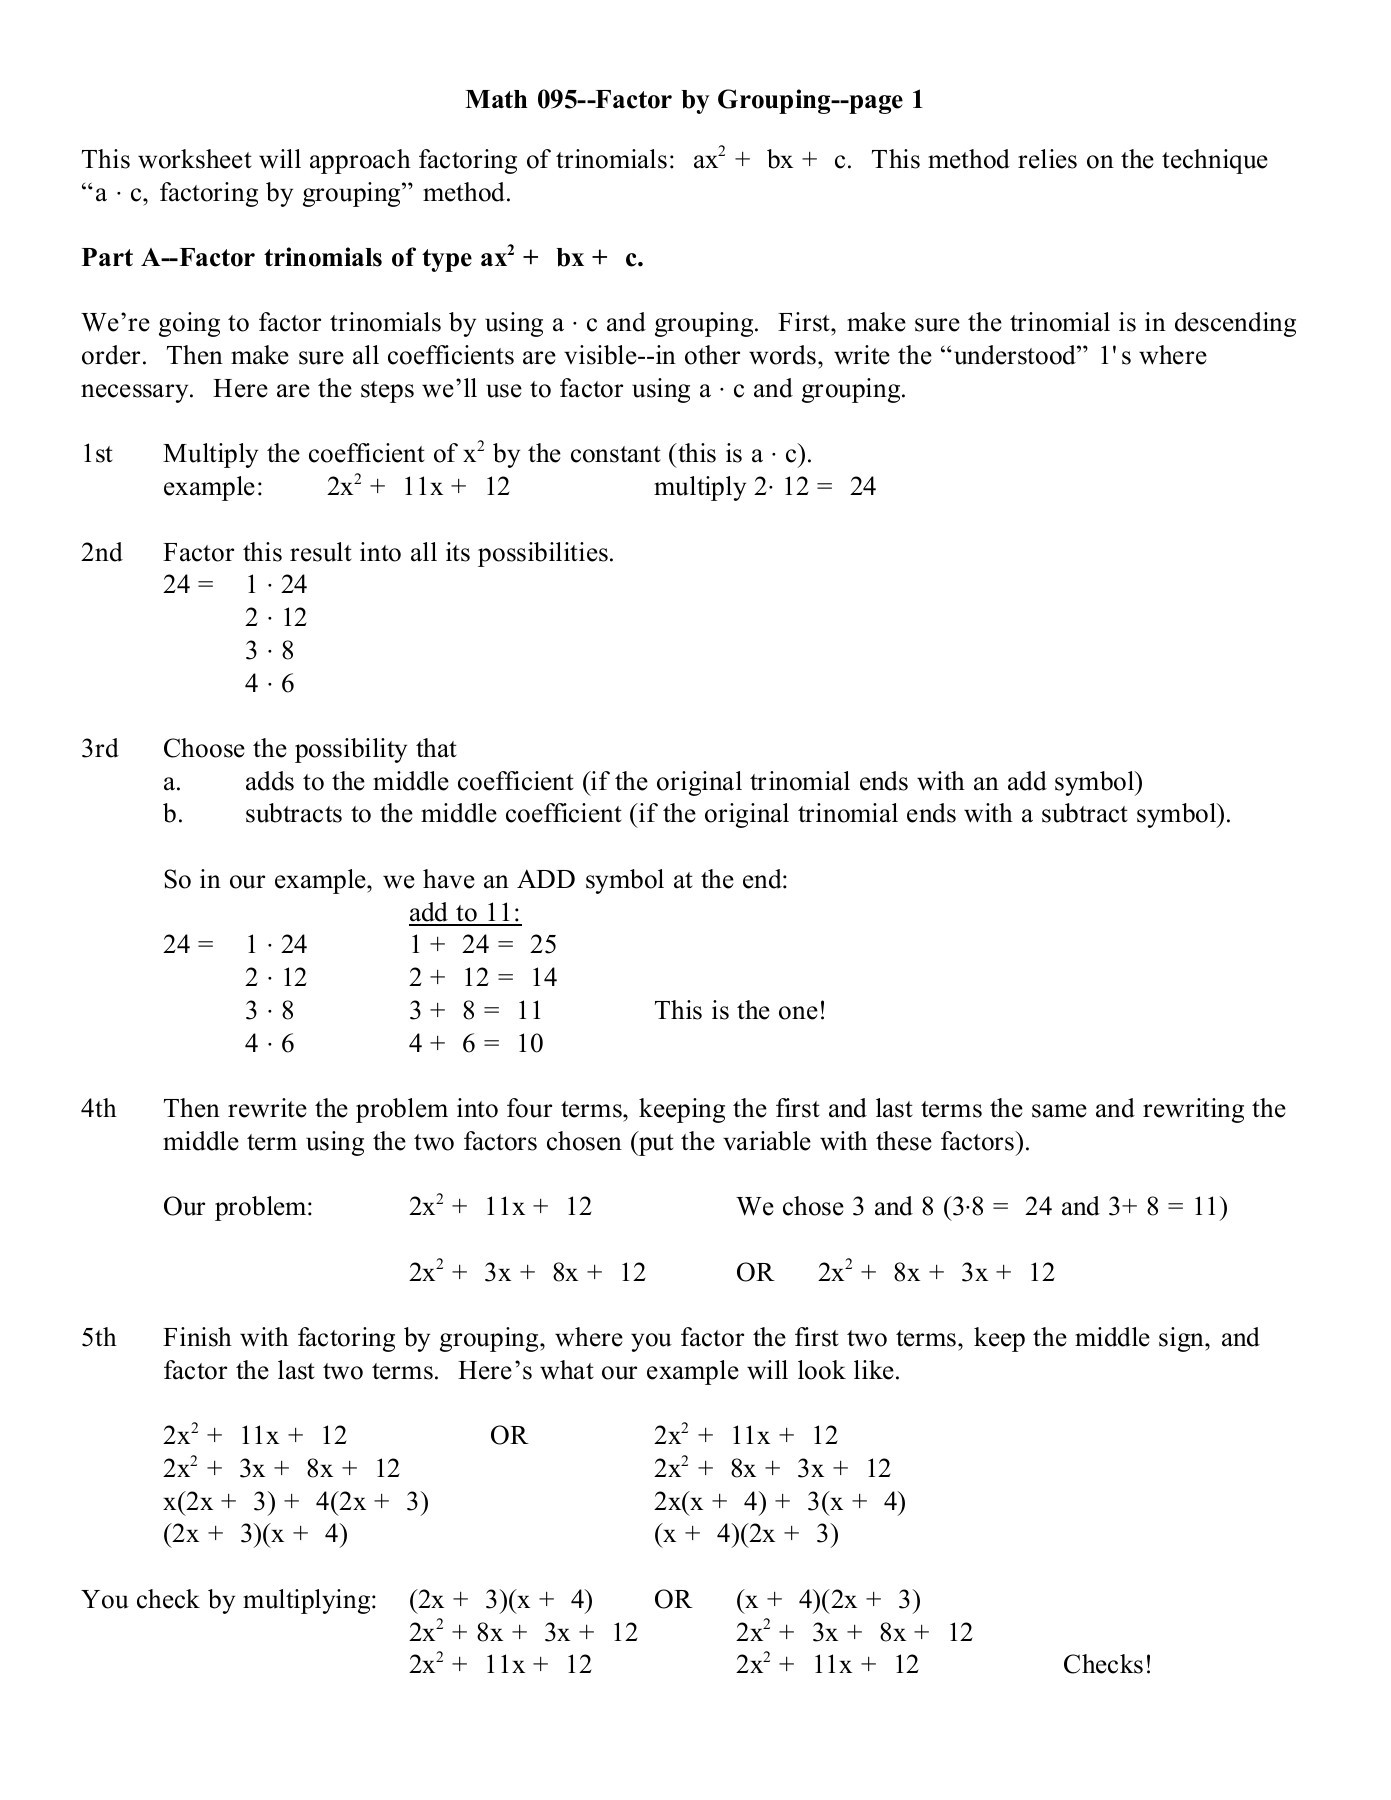 Factoring by Grouping Worksheet 7 5 Math 095 Factor by Grouping Page 1 Csn Pages 1